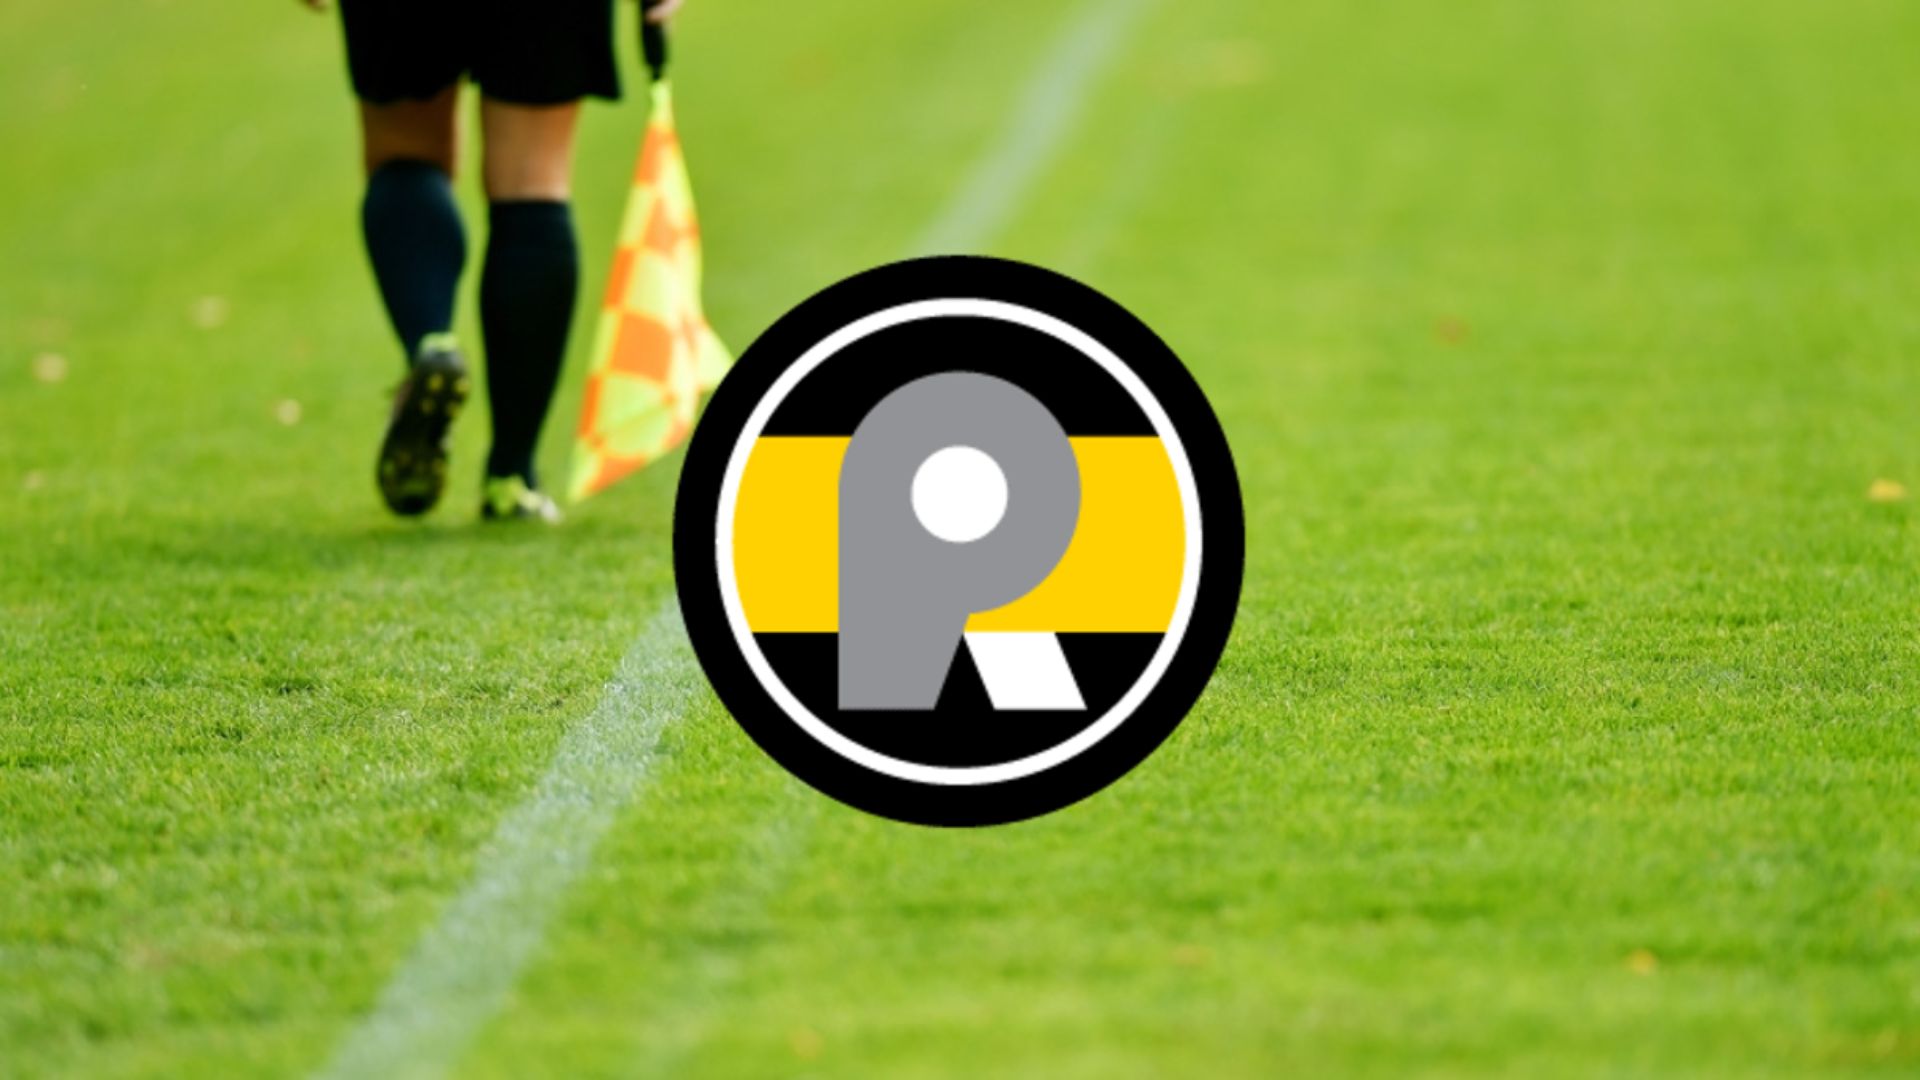 Refr Sports Secures $535,000 in Pre-Seed Funding